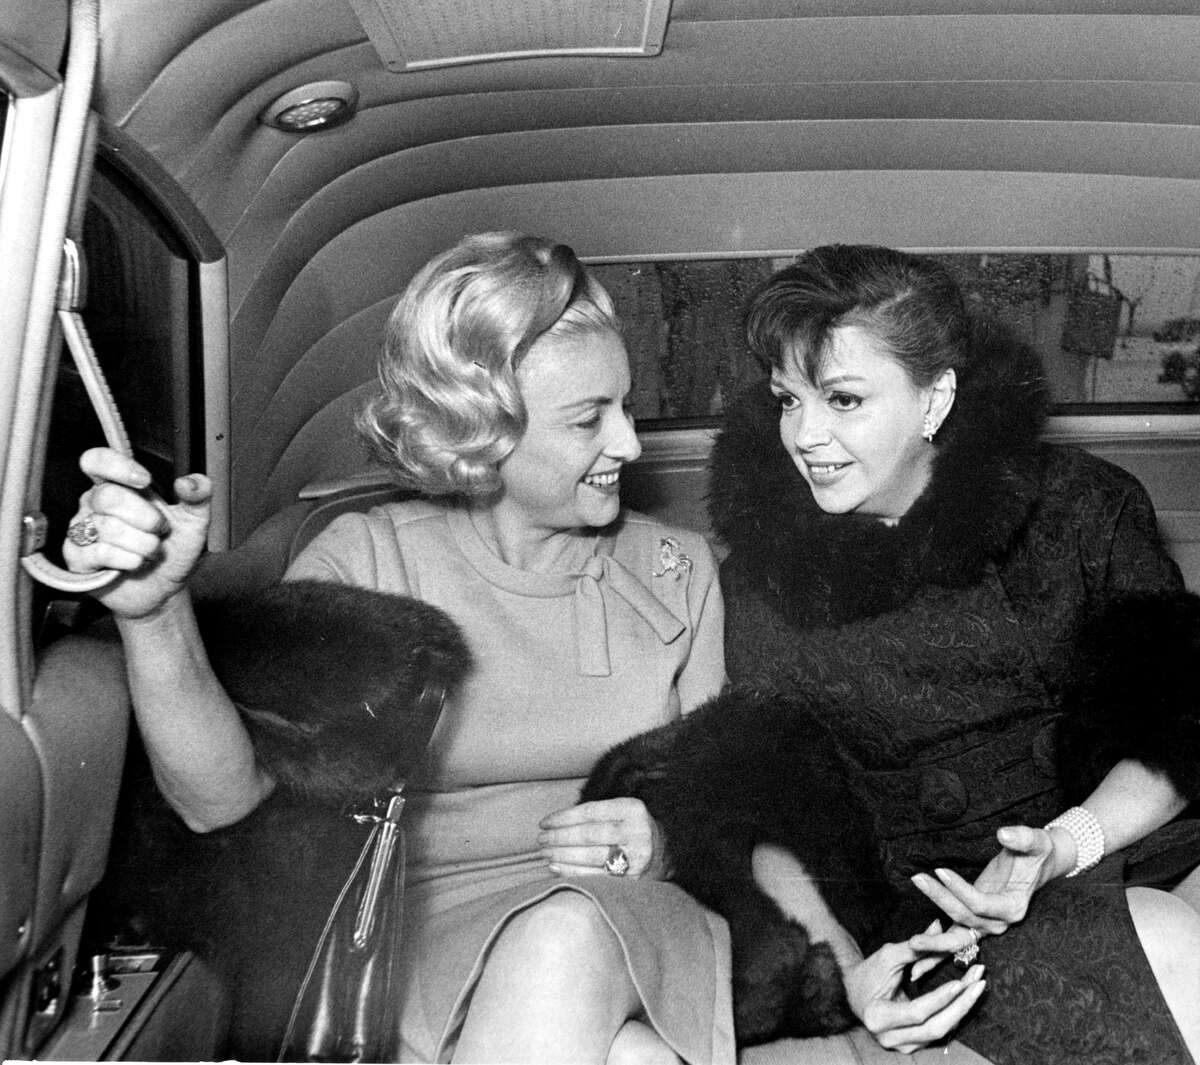 12/14/1965 - Houston Chronicle writer Maxine Mesinger shares a ride with singer Judy Garland leaving Houston International Airport.